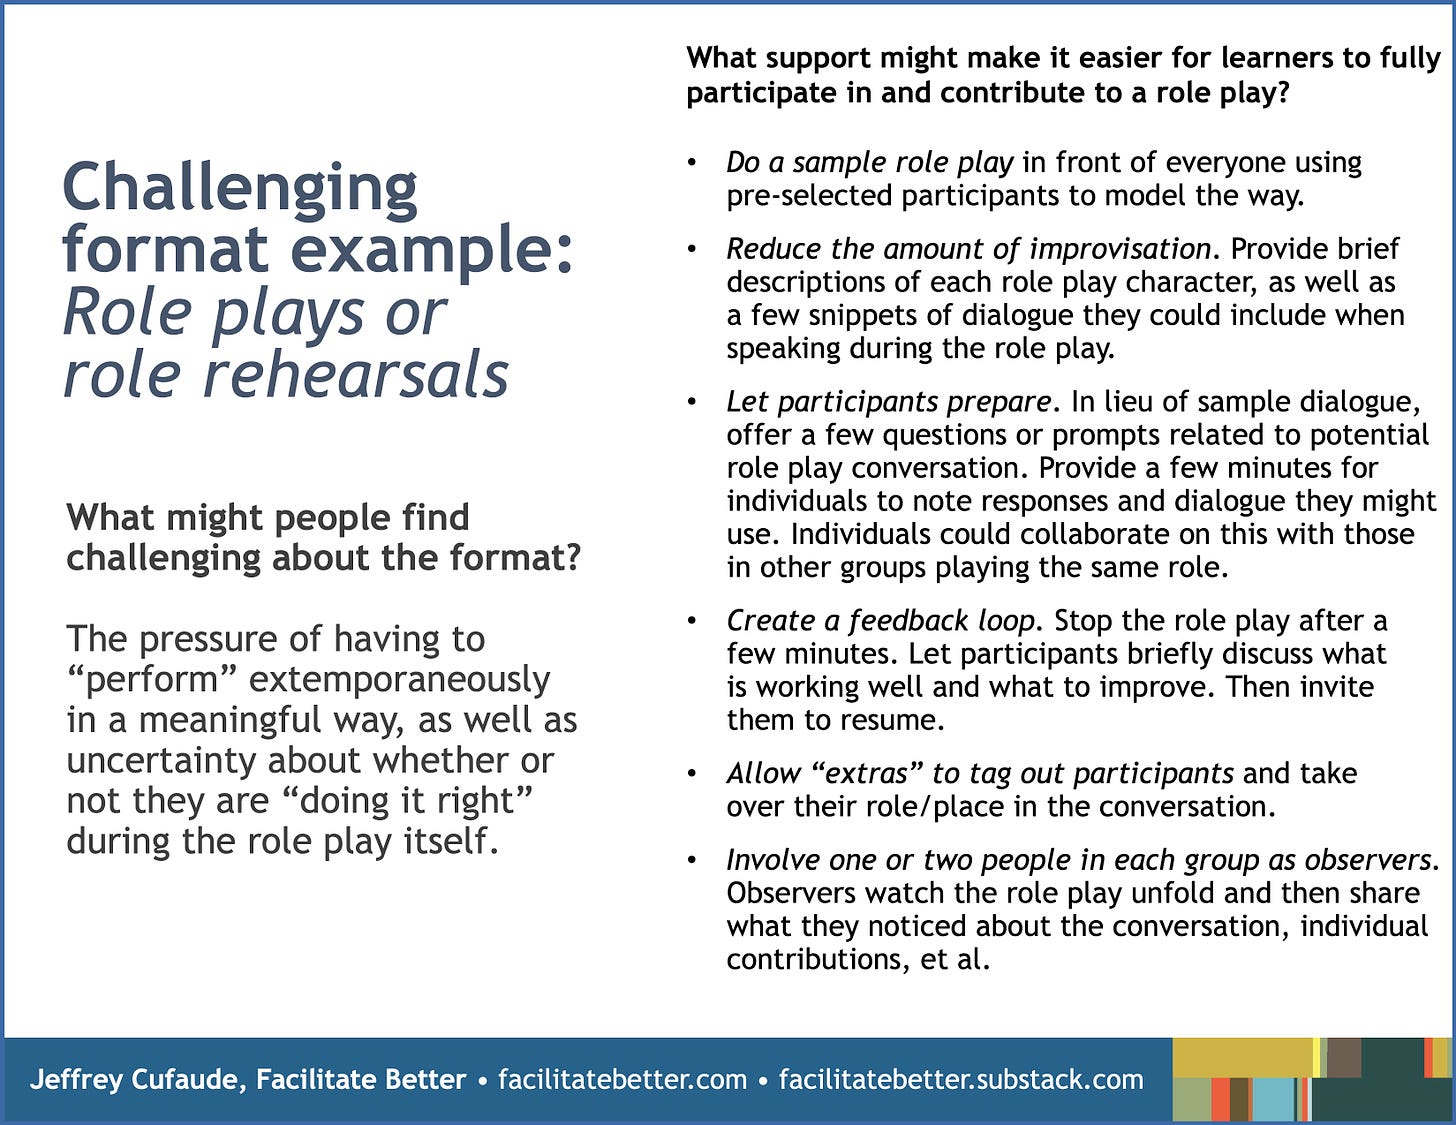 Challenging format example: Role plays or role rehearsals  What might people find challenging about the format?  The pressure of having to “perform” extemporaneously in a meaningful way, as well as uncertainty about whether or not they are “doing it right” during the role play itself. What support might make it easier for learners to fully participate in and contribute to a role play?  •Do a sample role play in front of everyone using pre-selected participants to model the way. •Reduce the amount of improvisation. Provide brief descriptions of each role play character, as well as a few snippets of dialogue they could include when speaking during the role play. •Let participants prepare. In lieu of sample dialogue, offer a few questions or prompts related to potential role play conversation. Provide a few minutes for individuals to note responses and dialogue they might use. Individuals could collaborate on this with those in other groups playing the same role.  •Create a feedback loop. Stop the role play after a few minutes. Let participants briefly discuss what is working well and what to improve. Then invite them to resume. •Allow “extras” to tag out participants and take over their role/place in the conversation. •Involve one or two people in each group as observers.  Observers watch the role play unfold and then share what they noticed about the conversation, individual contributions, et al.